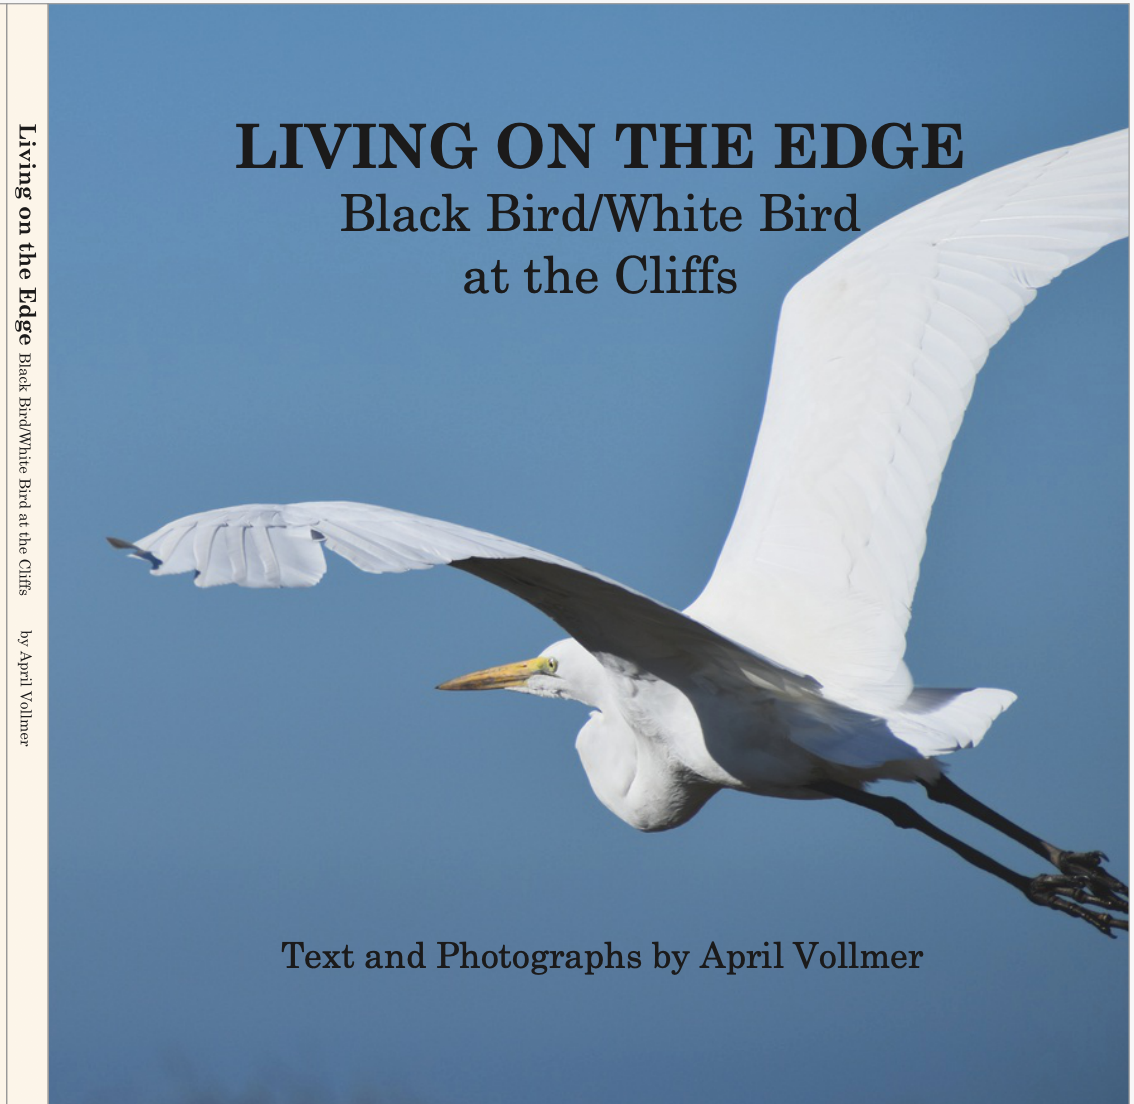 New Book: Living on the Edge